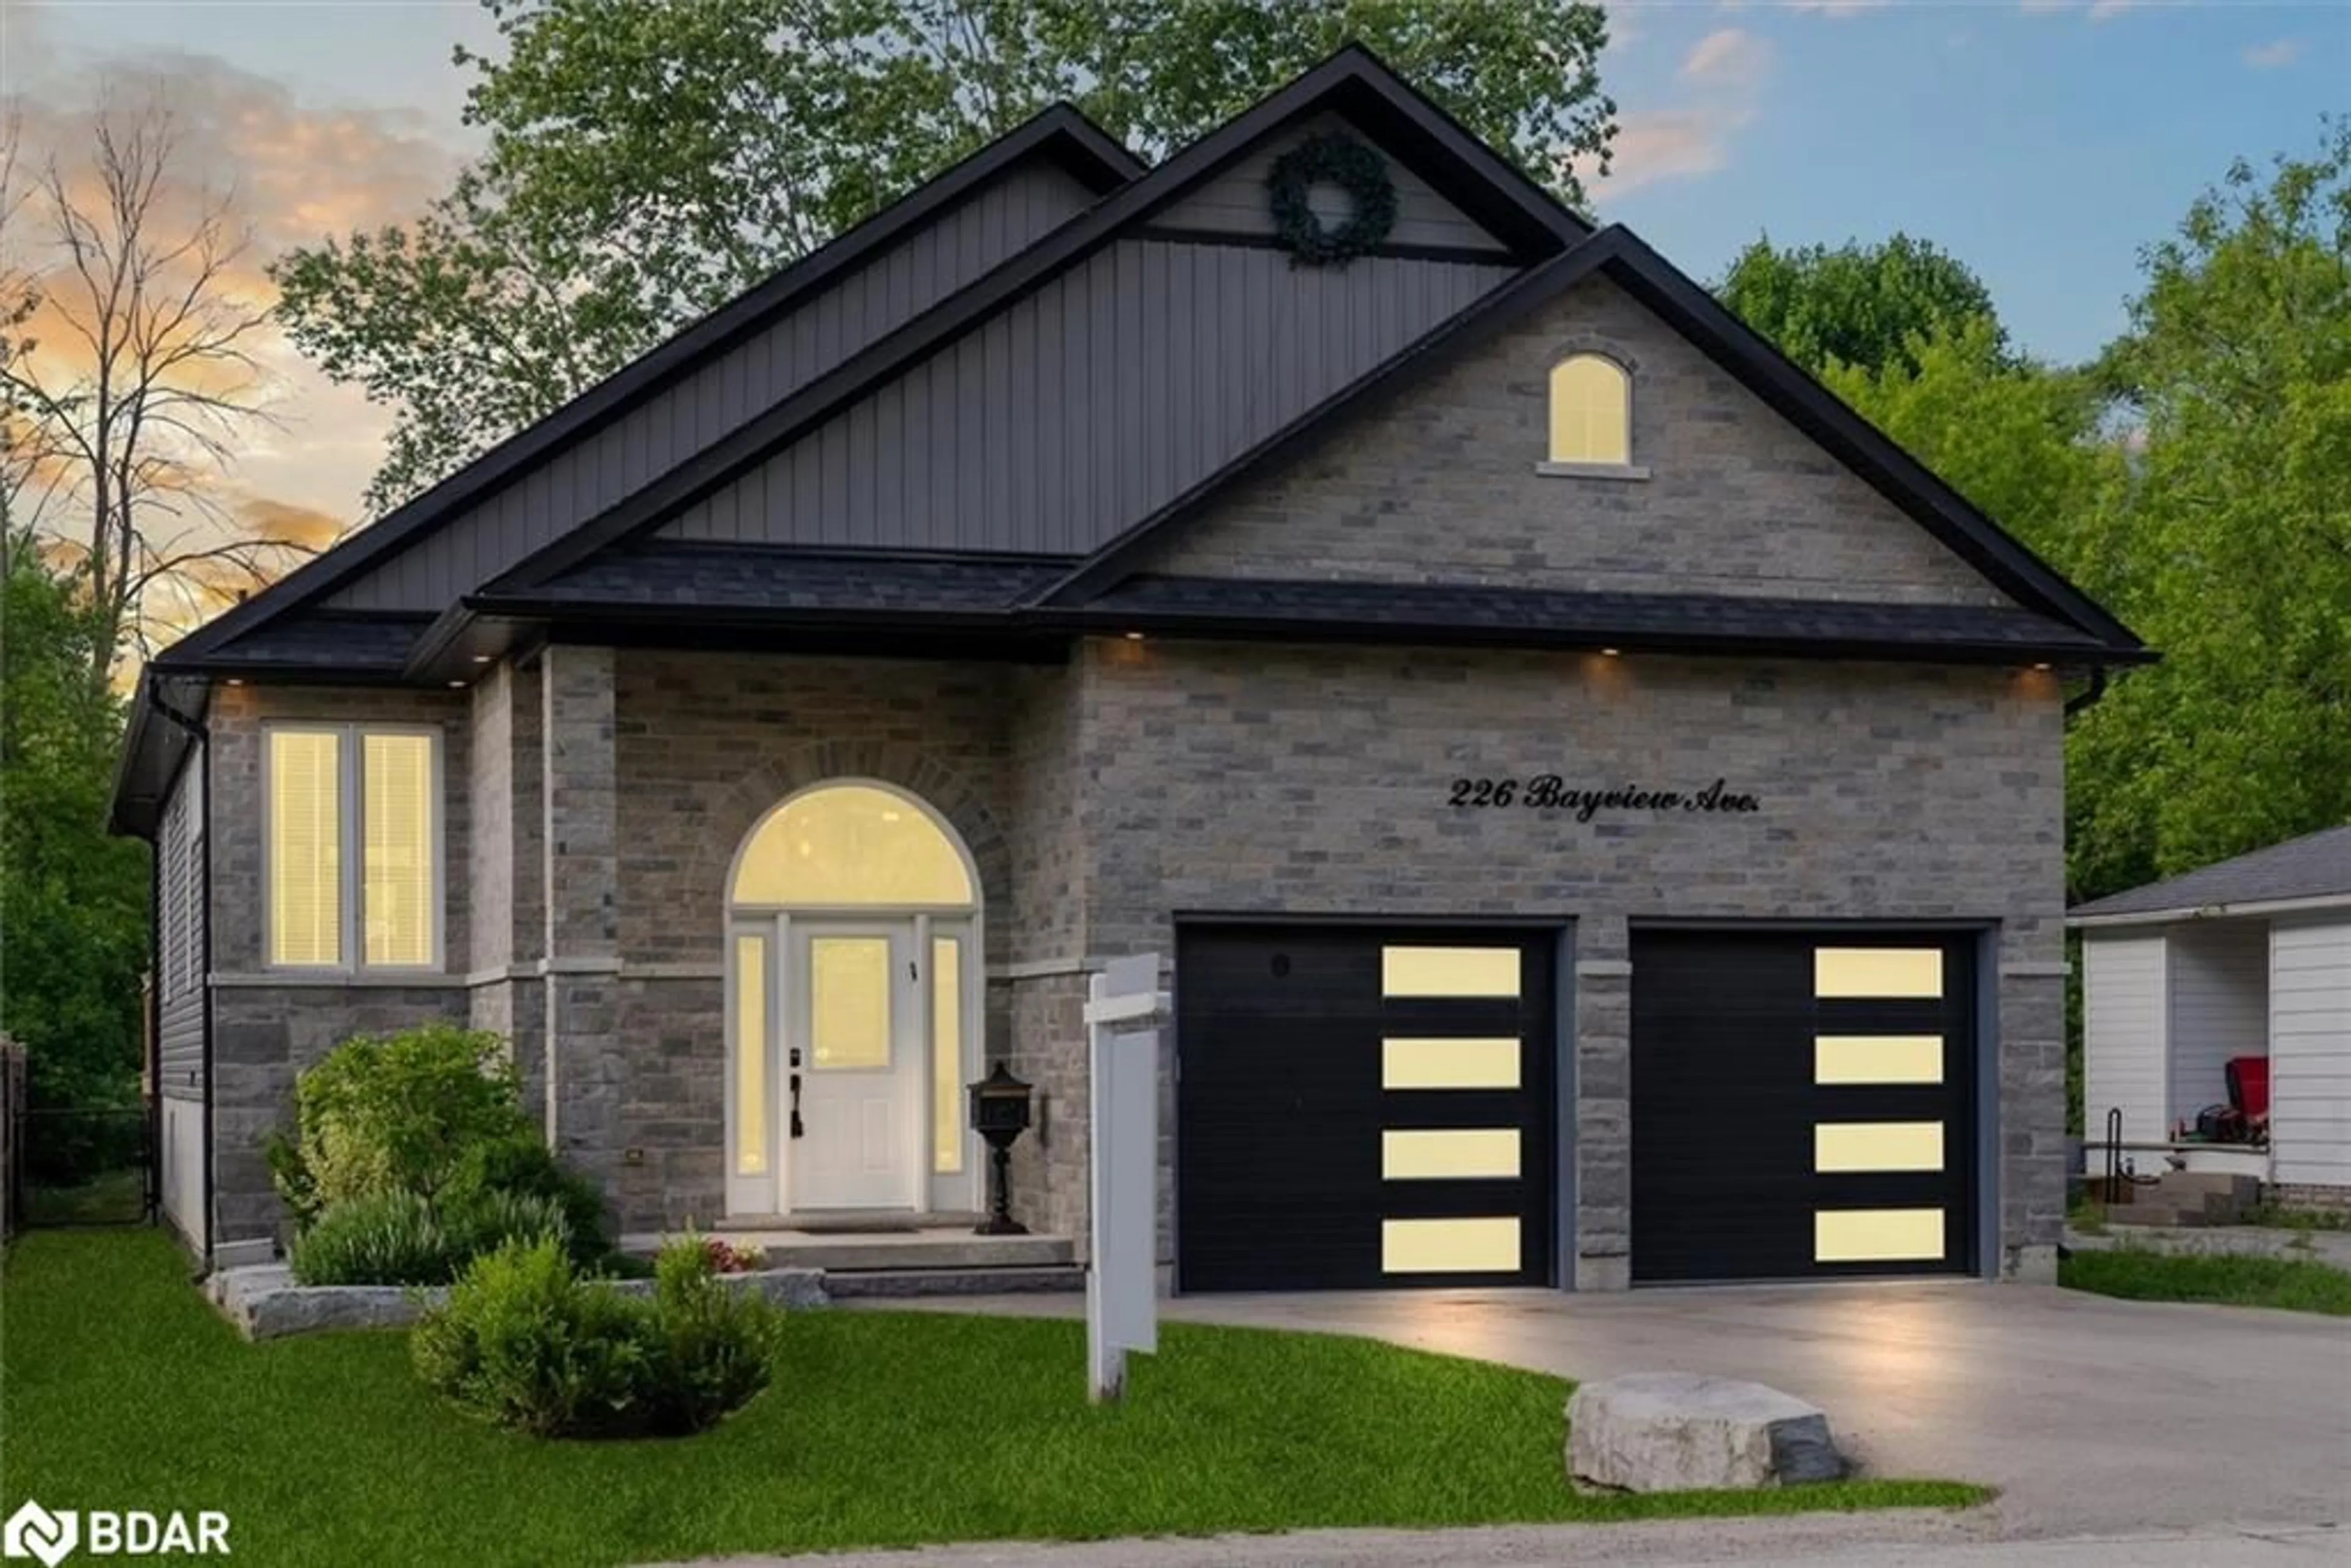 Home with brick exterior material for 226 Bayview Ave, Georgina Ontario L4P 2T2